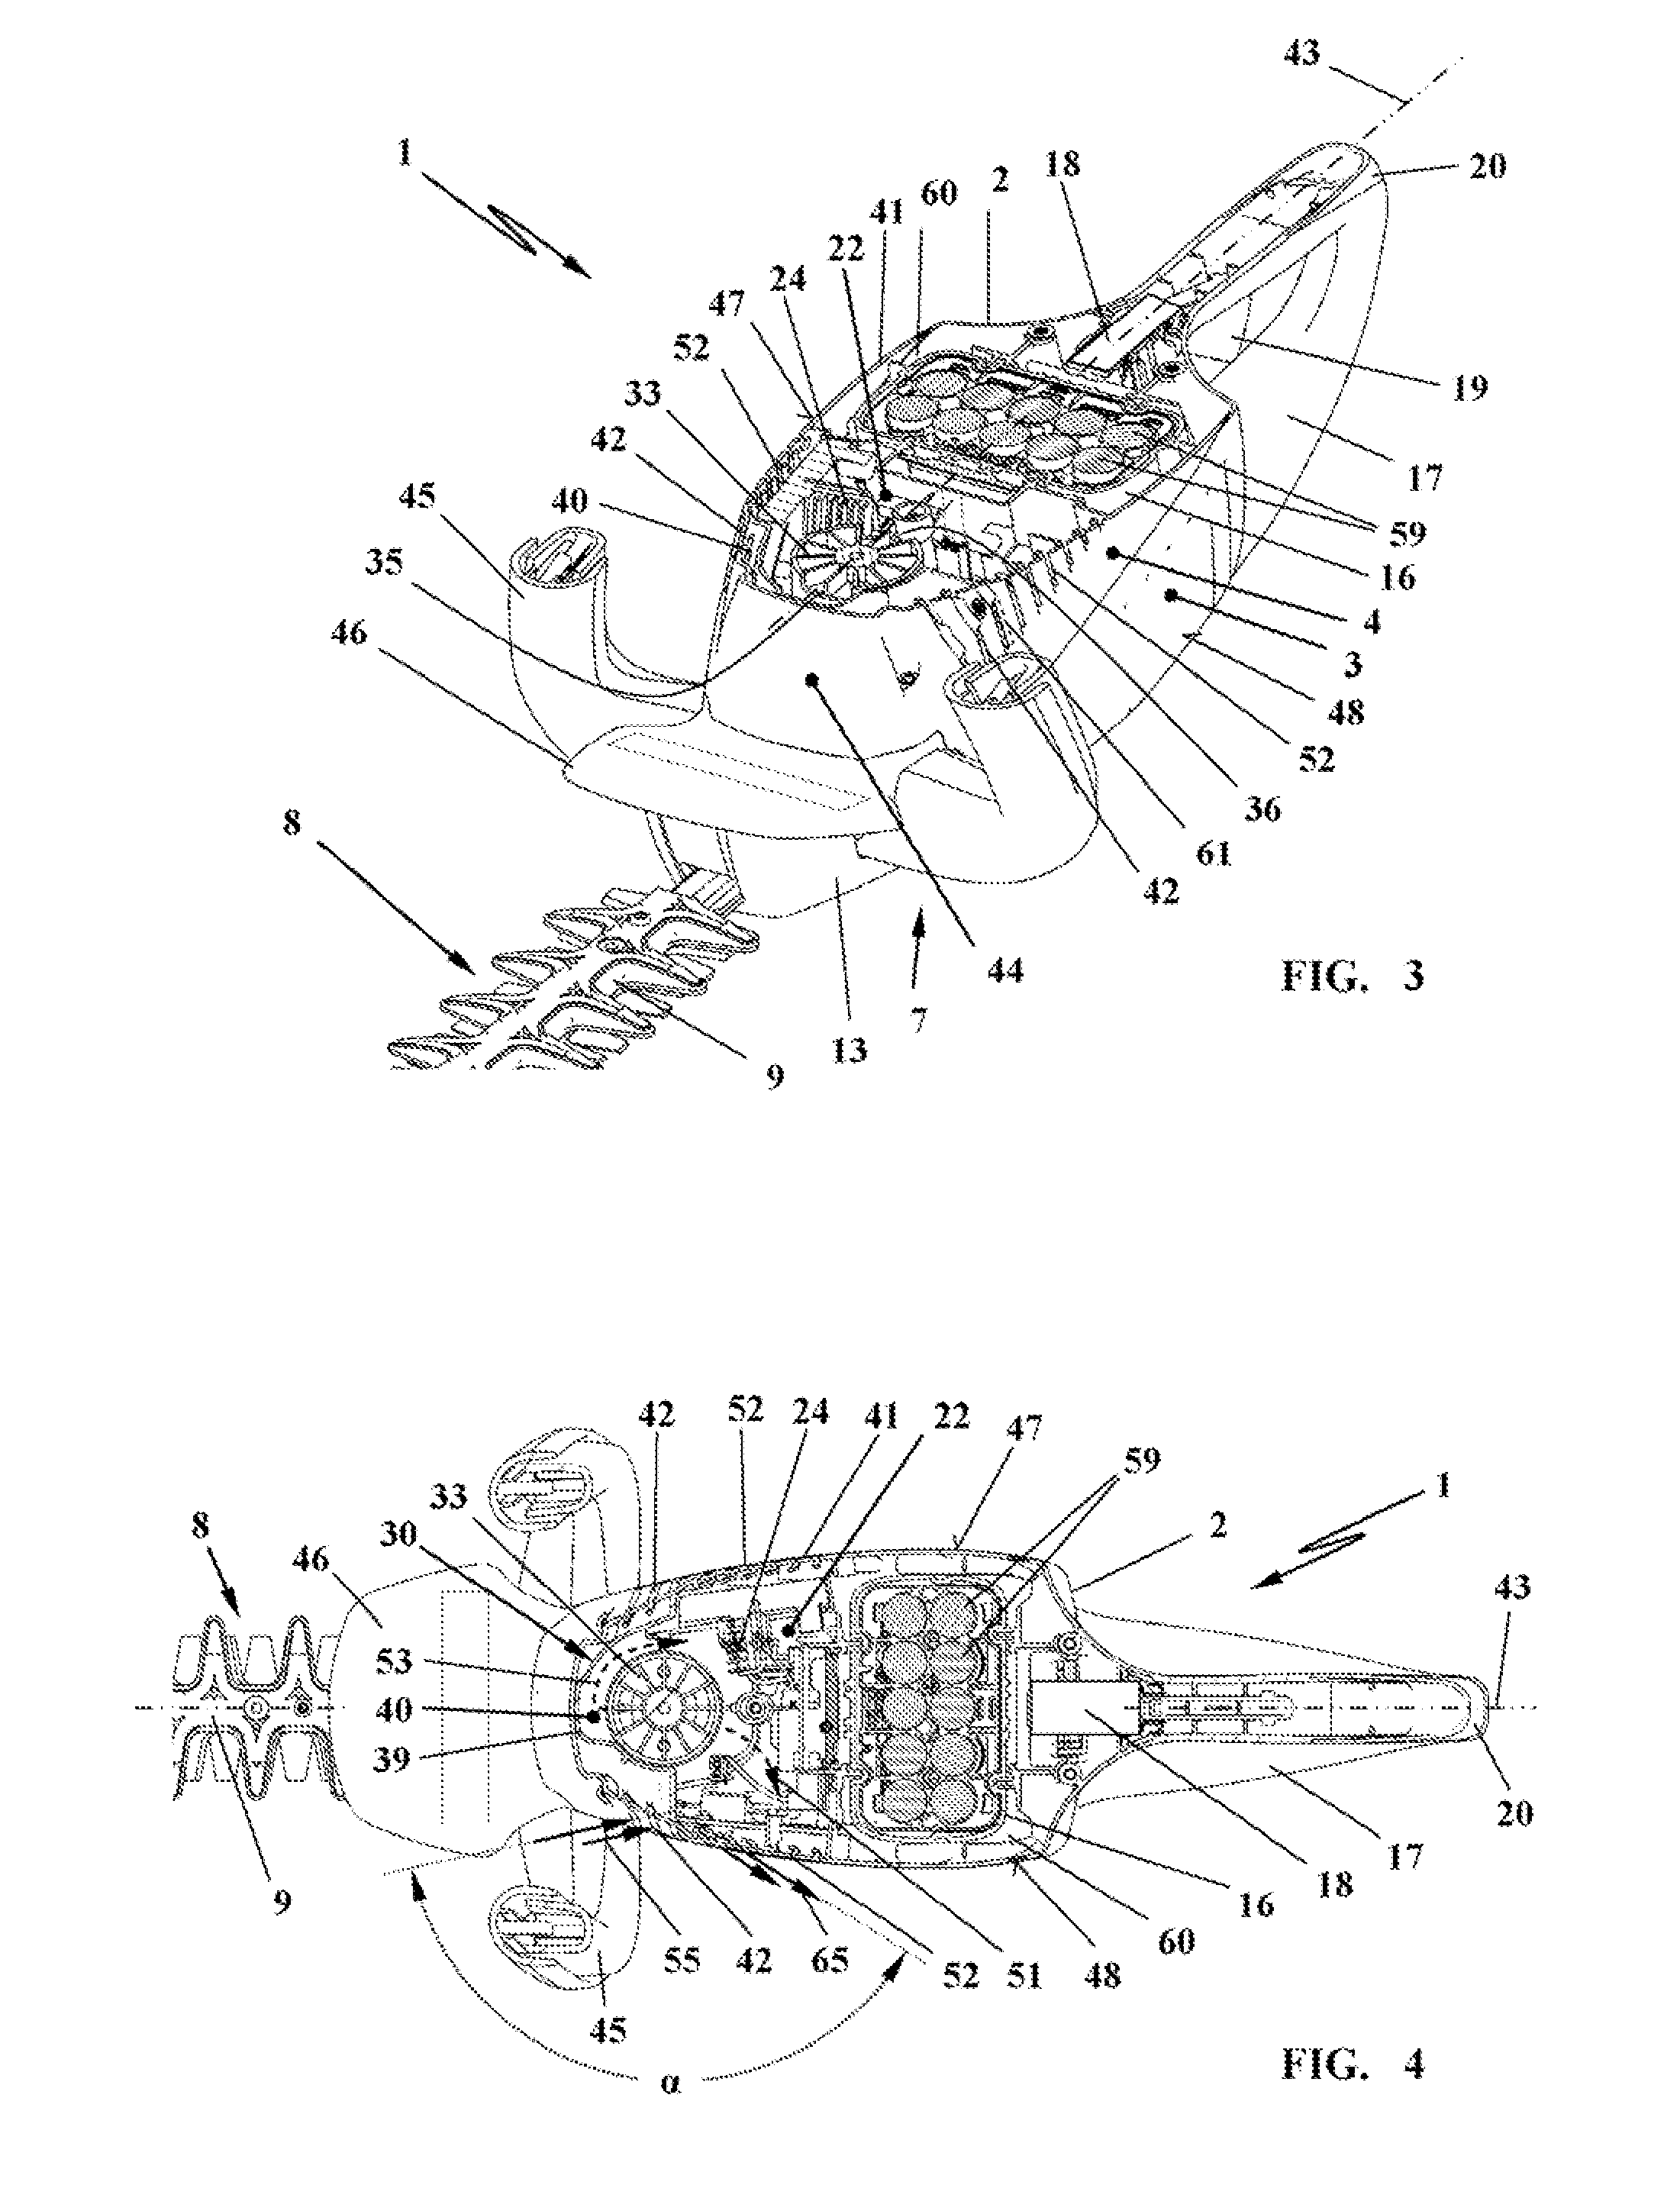 Battery-Operated Hand-Held Electric Device